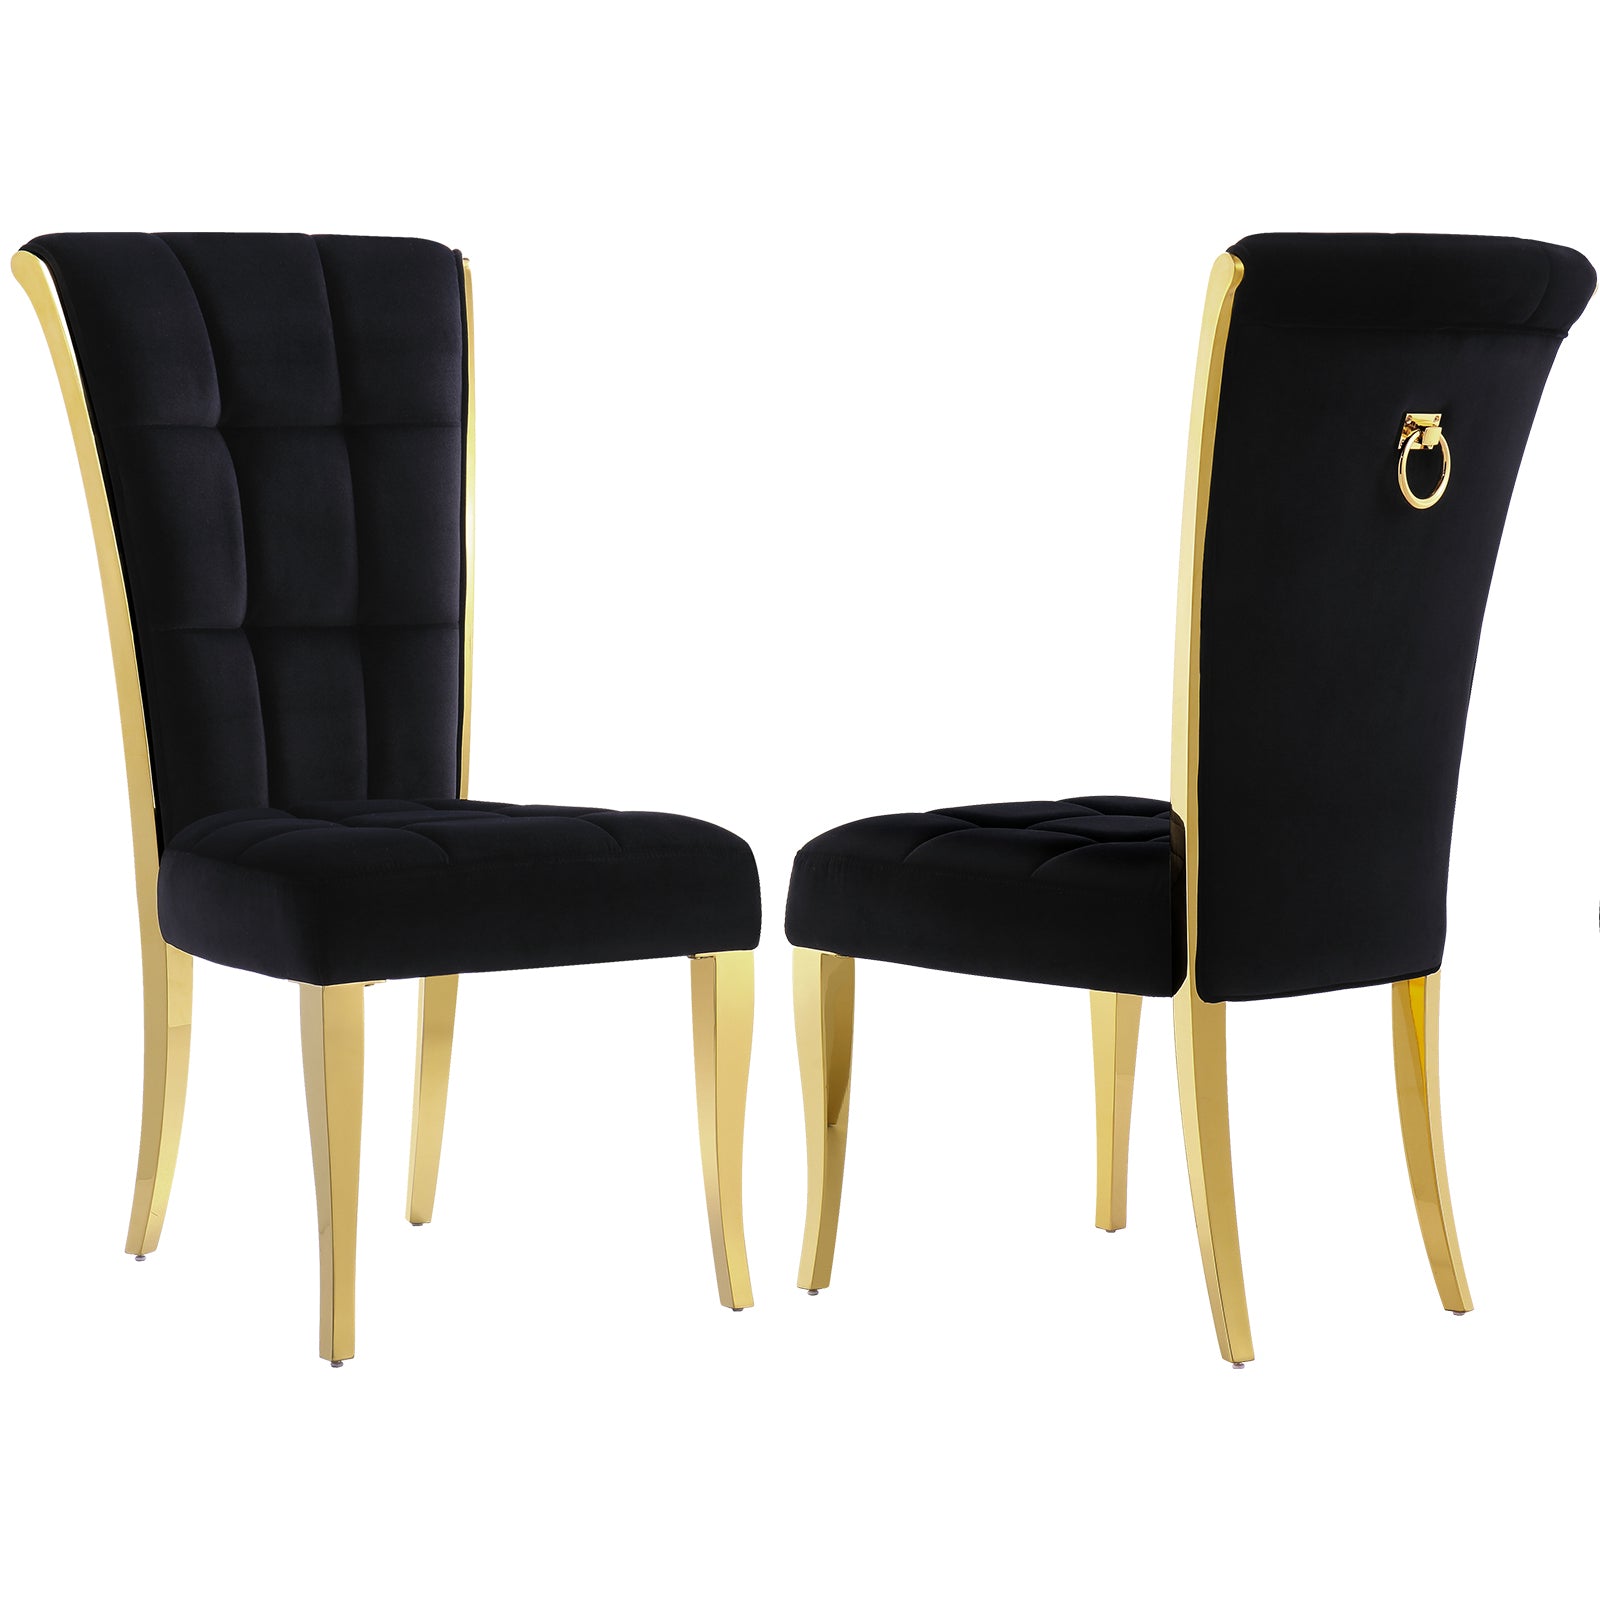 The Perfect Addition to Your Dining Room: High-Quality Velvet Dining Chairs